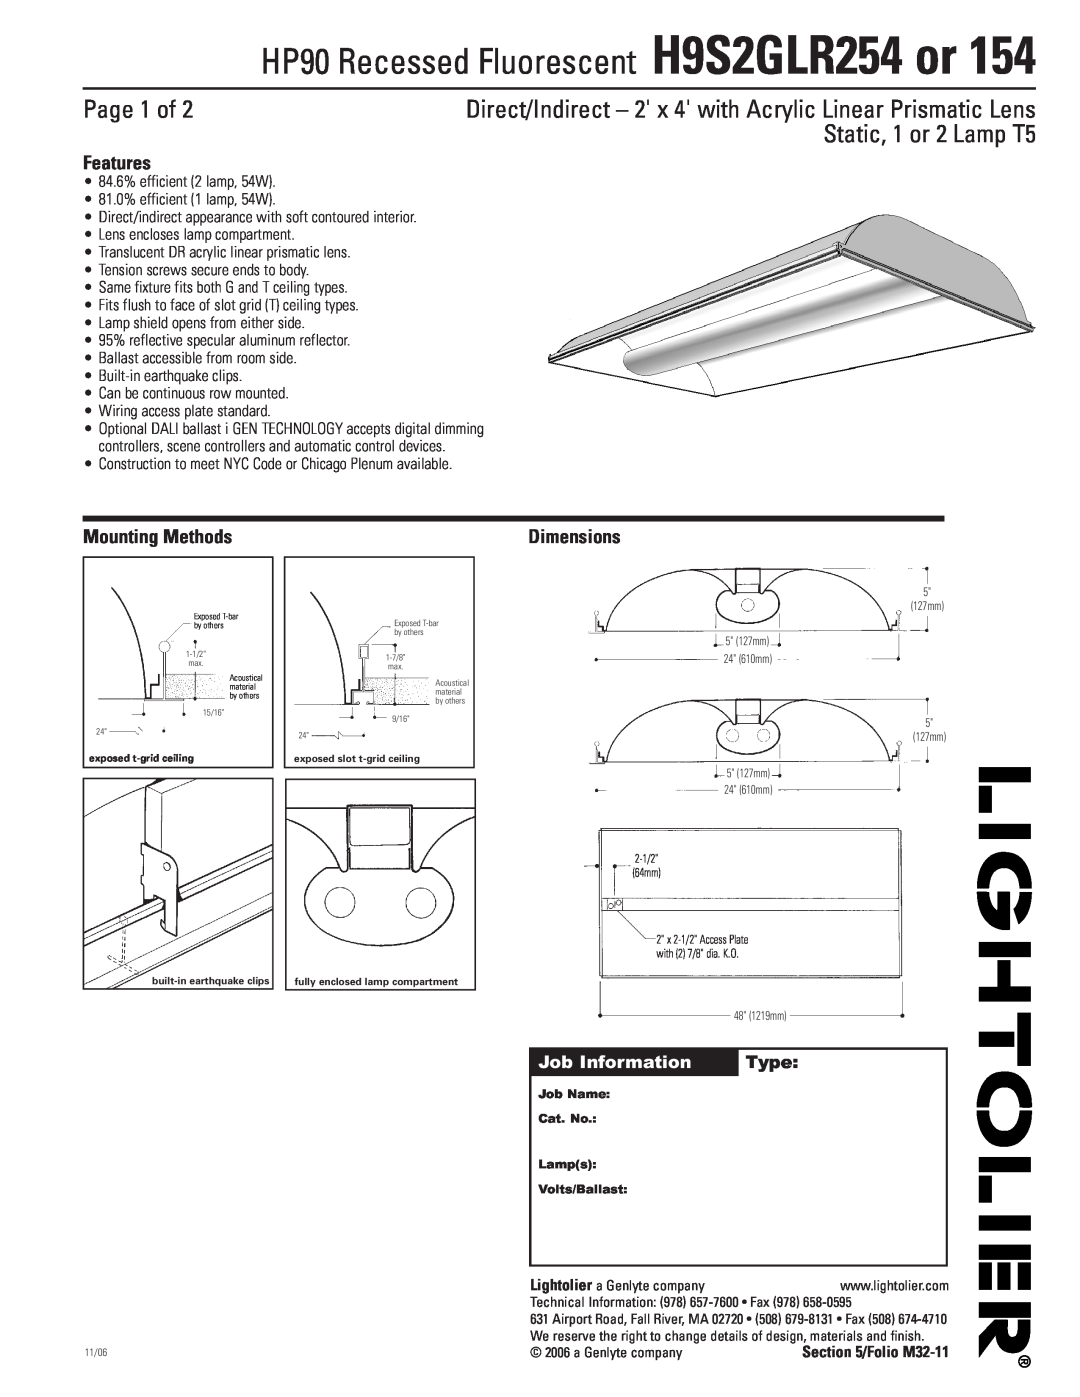 Lightolier dimensions HP90 Recessed Fluorescent H9S2GLR254 or, Page 1 of, Static, 1 or 2 Lamp T5, Features, Dimensions 